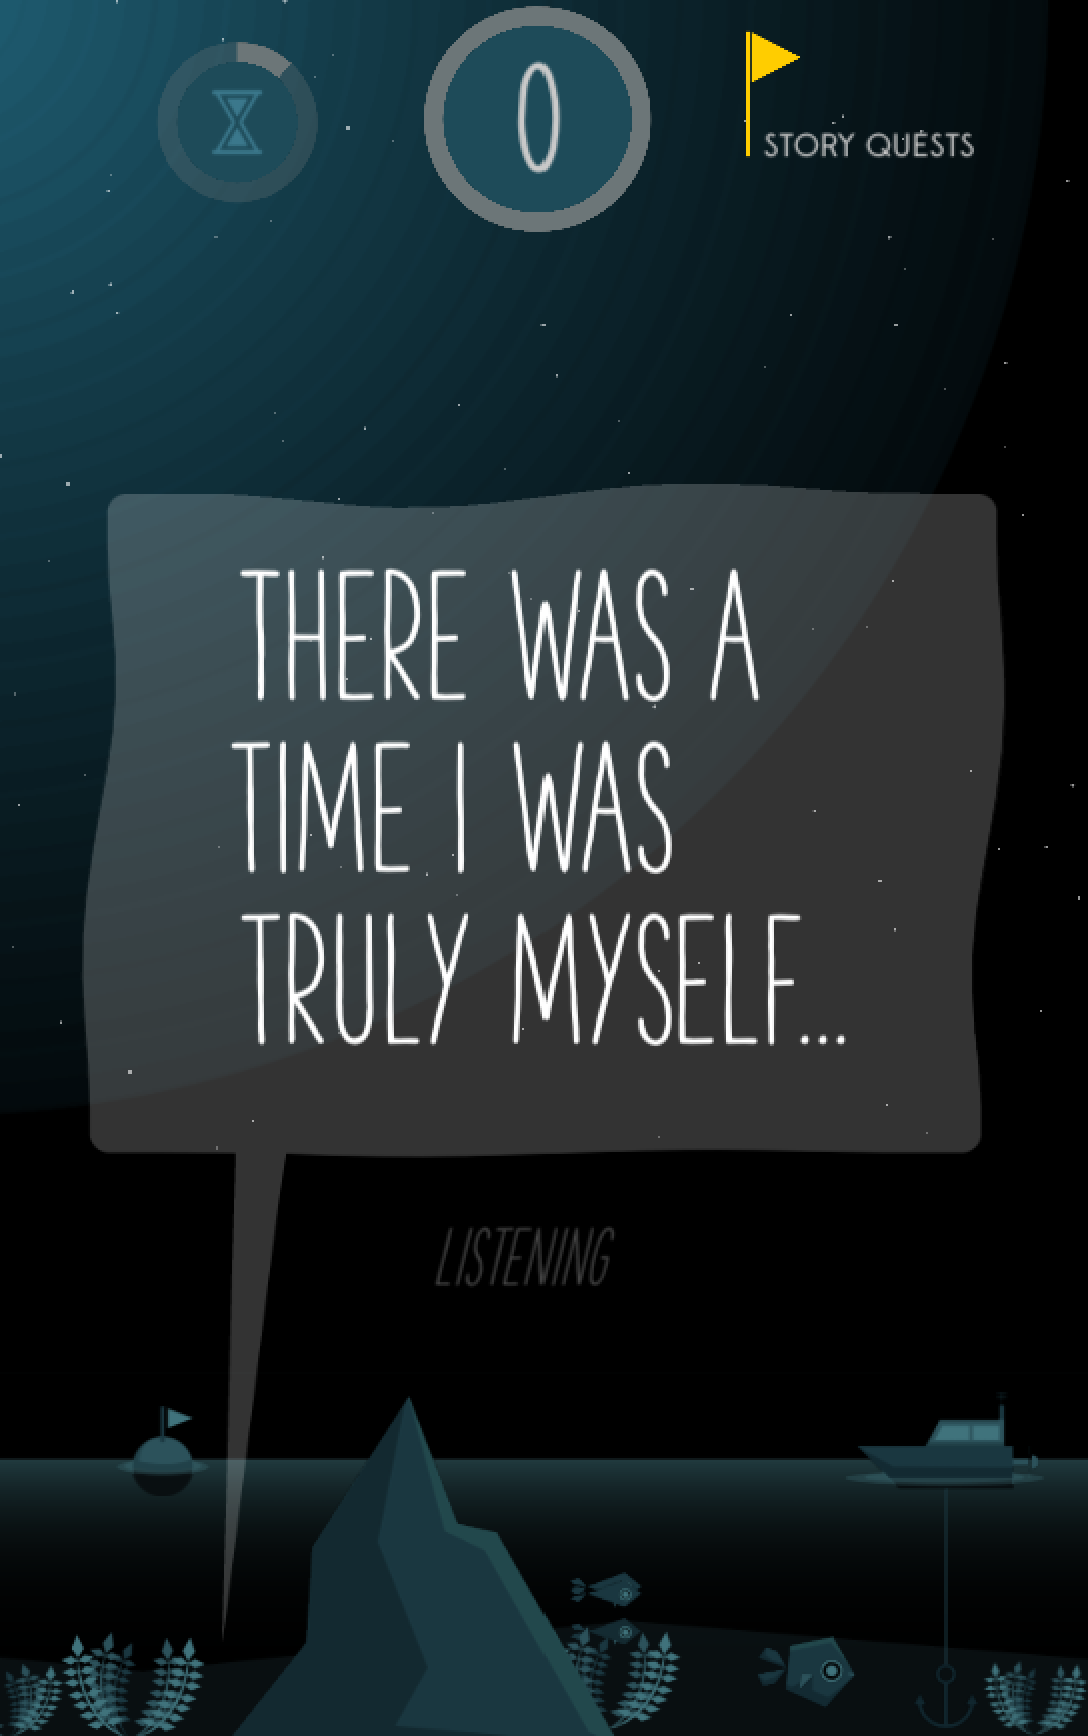 Smartphone screenshot of a question prompt during gameplay. The top has a countdown timer and button for story quests. In the prompt in the middle states, 'There was a time I was truly myself...'